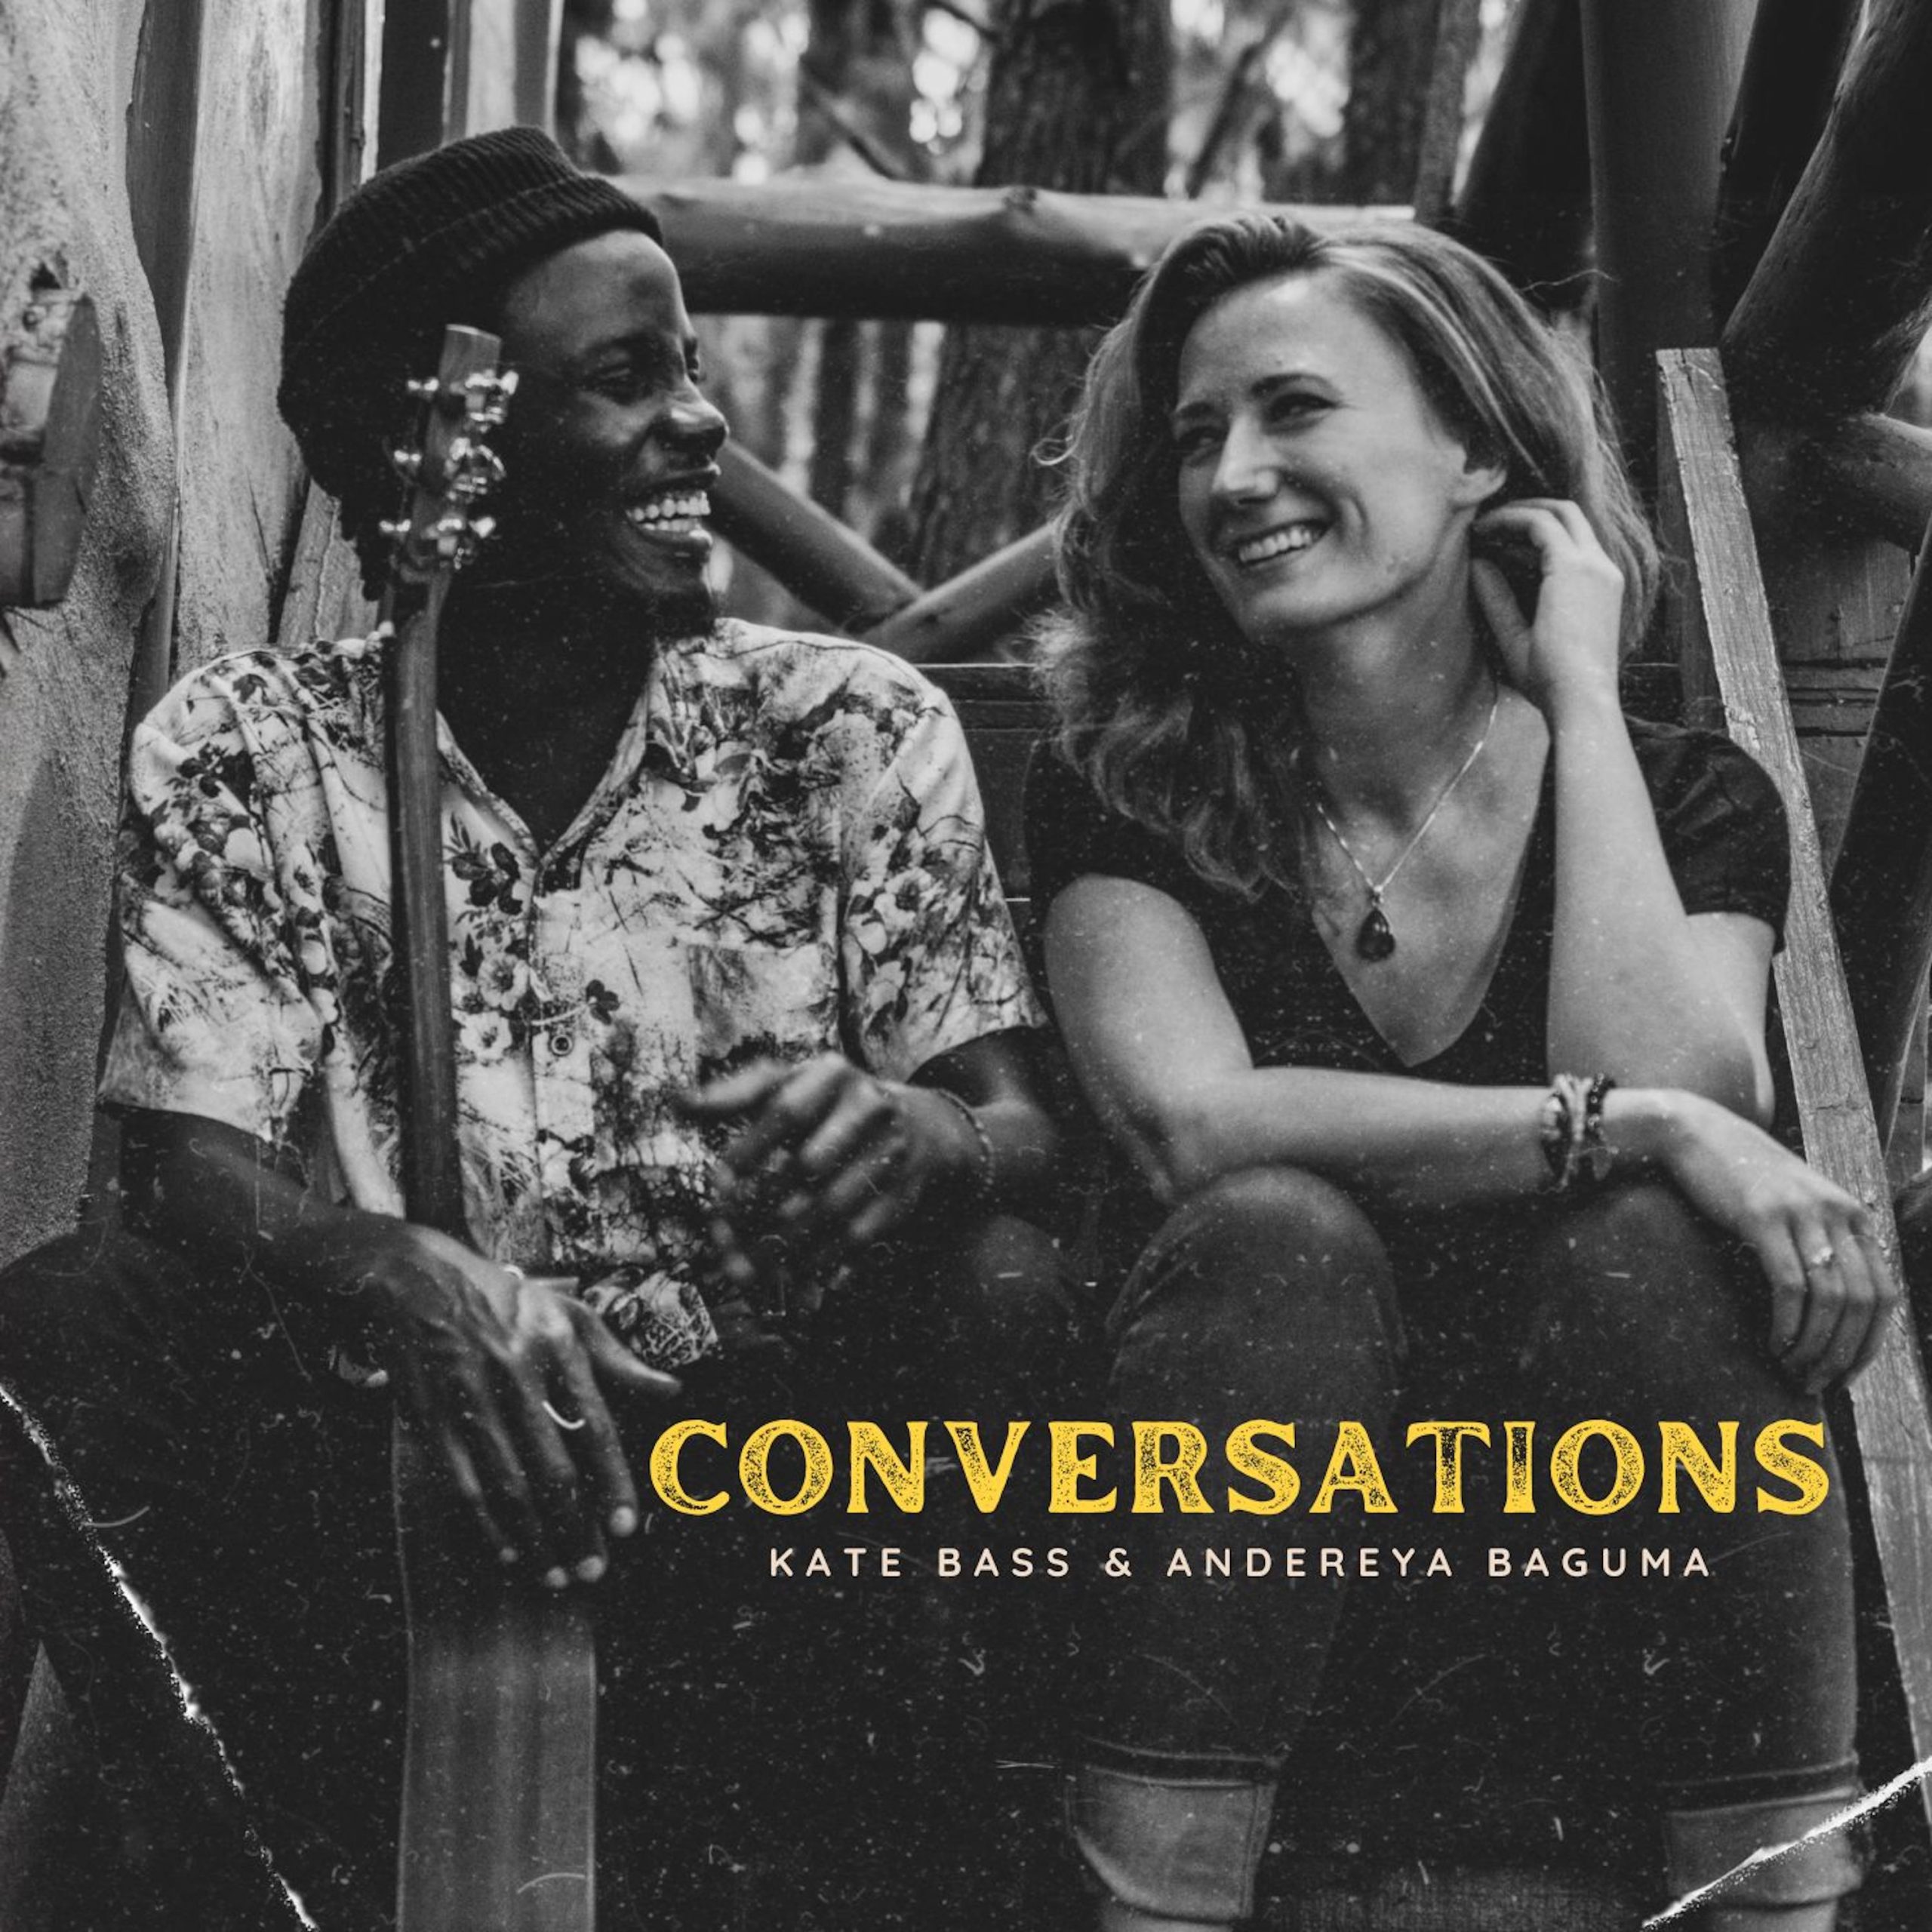 “Conversations” is out now